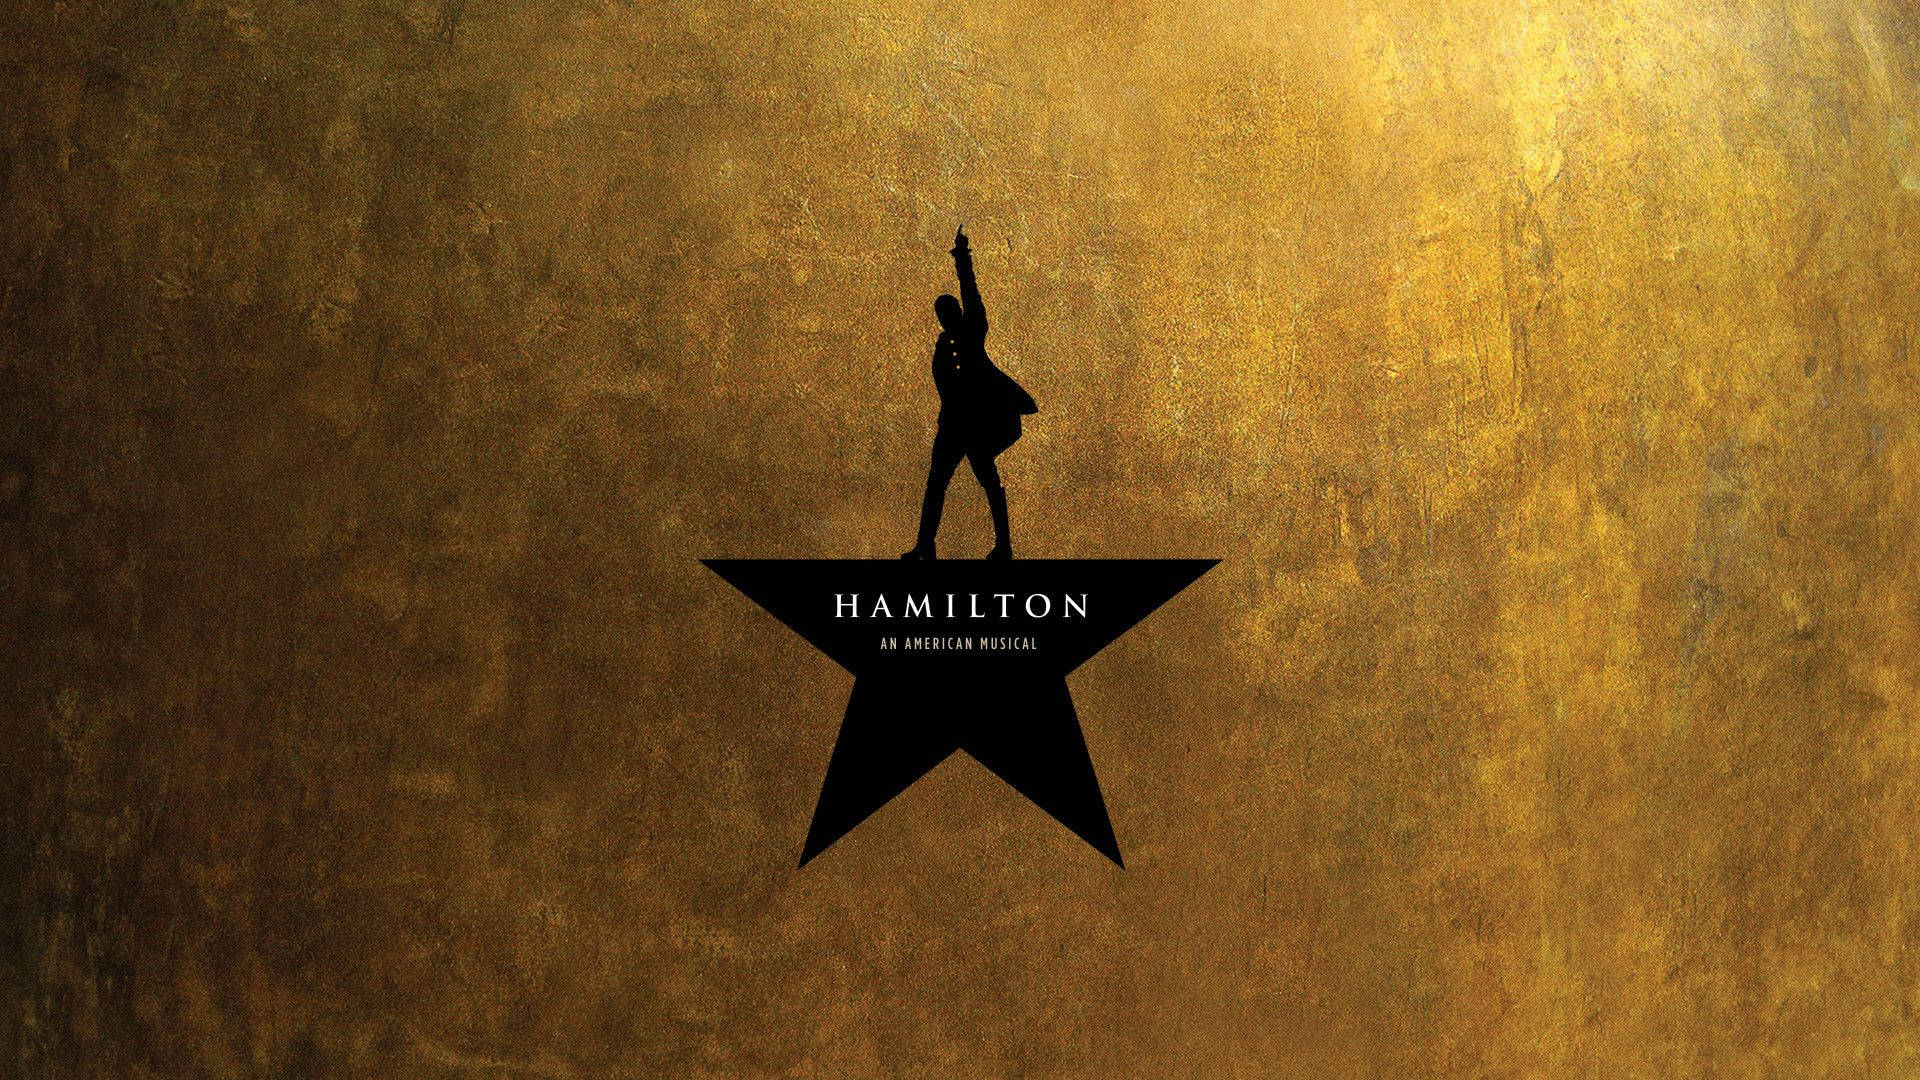 Be part of something special. Join us for Hamilton, the hit musical. Wallpaper